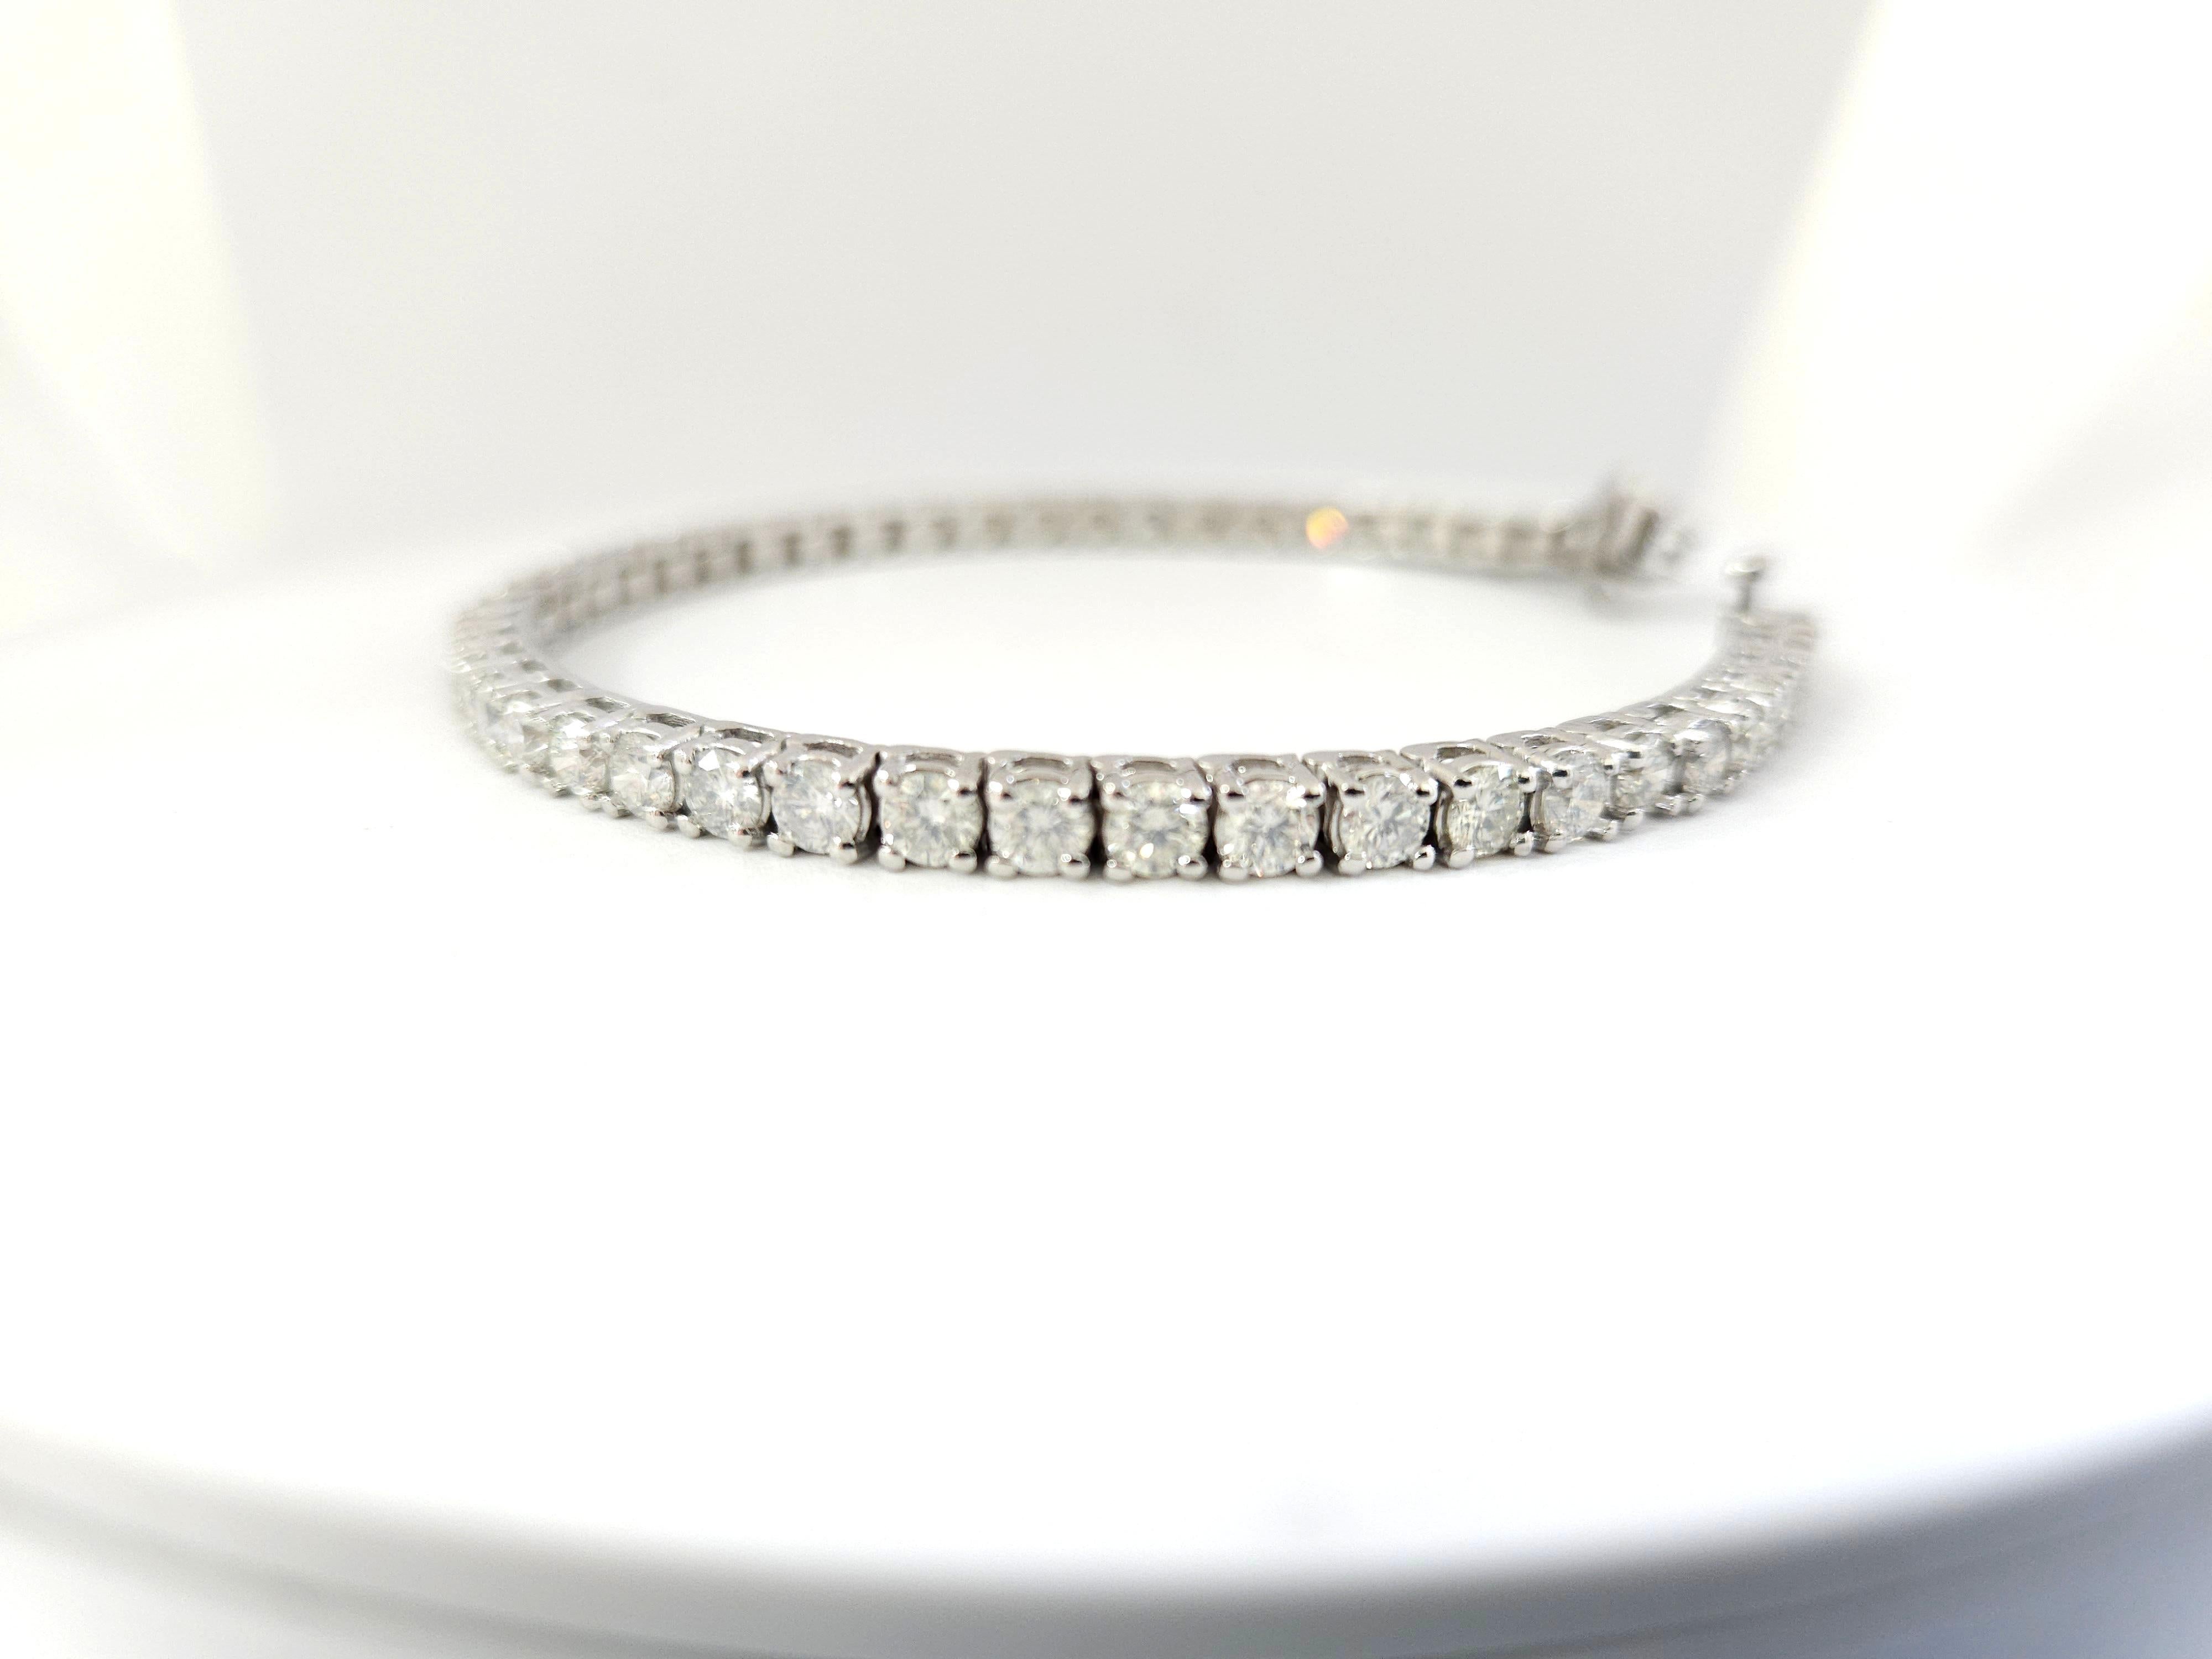 7.10 Carat Round Brilliant Cut Diamond Tennis Bracelet 14 Karat White Gold In New Condition For Sale In Great Neck, NY